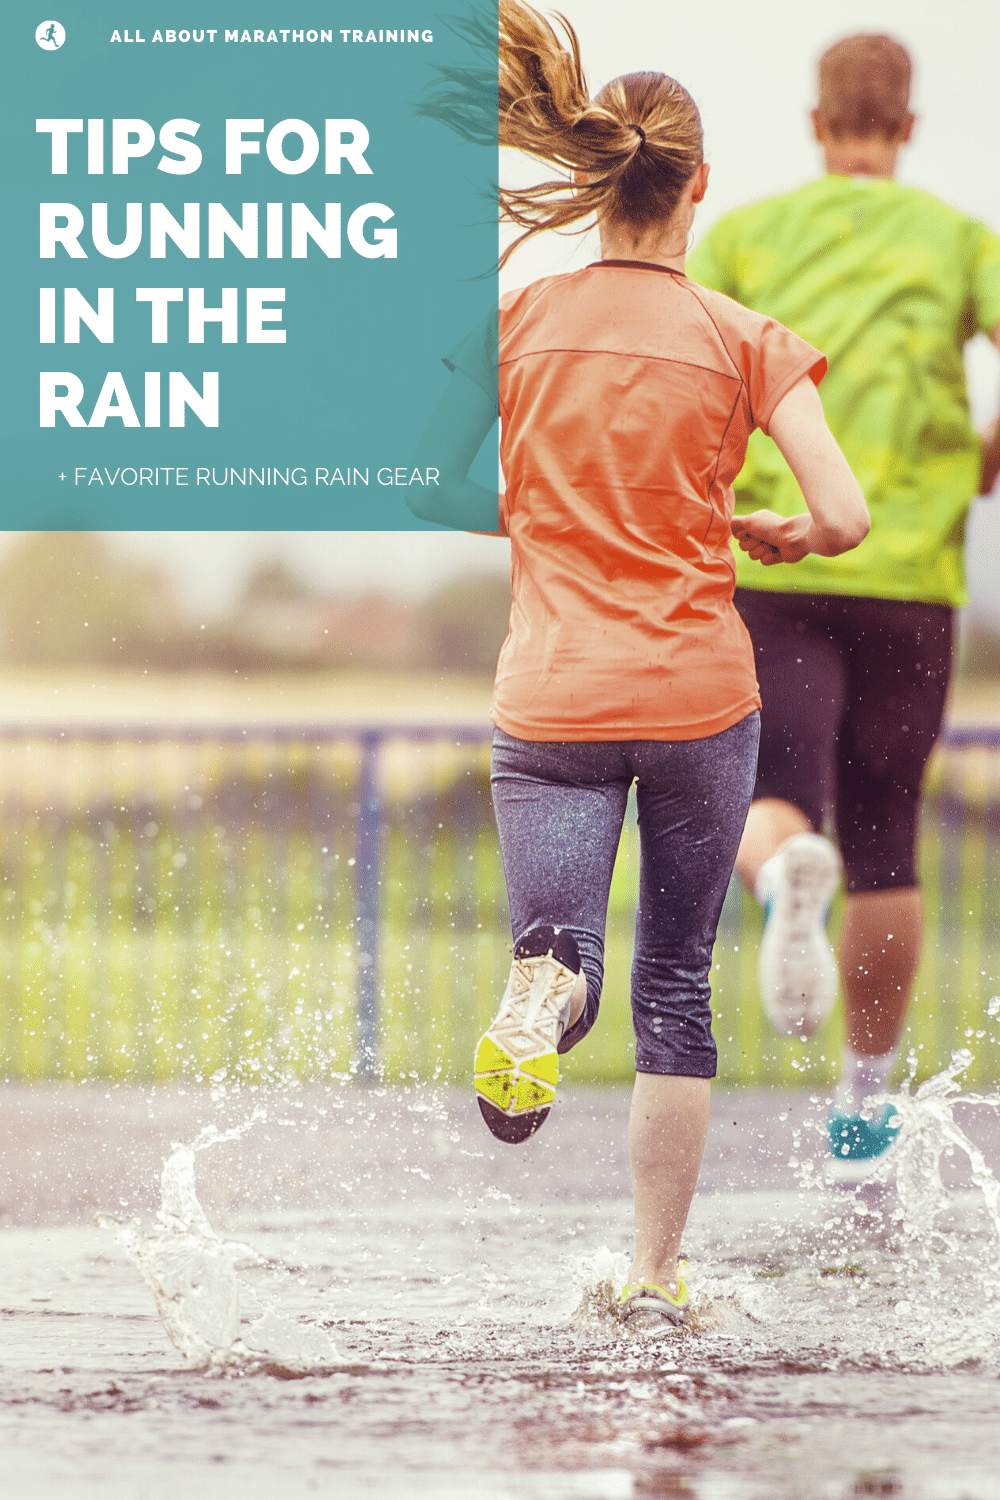 9 Tips for Running in the Rain from Pros